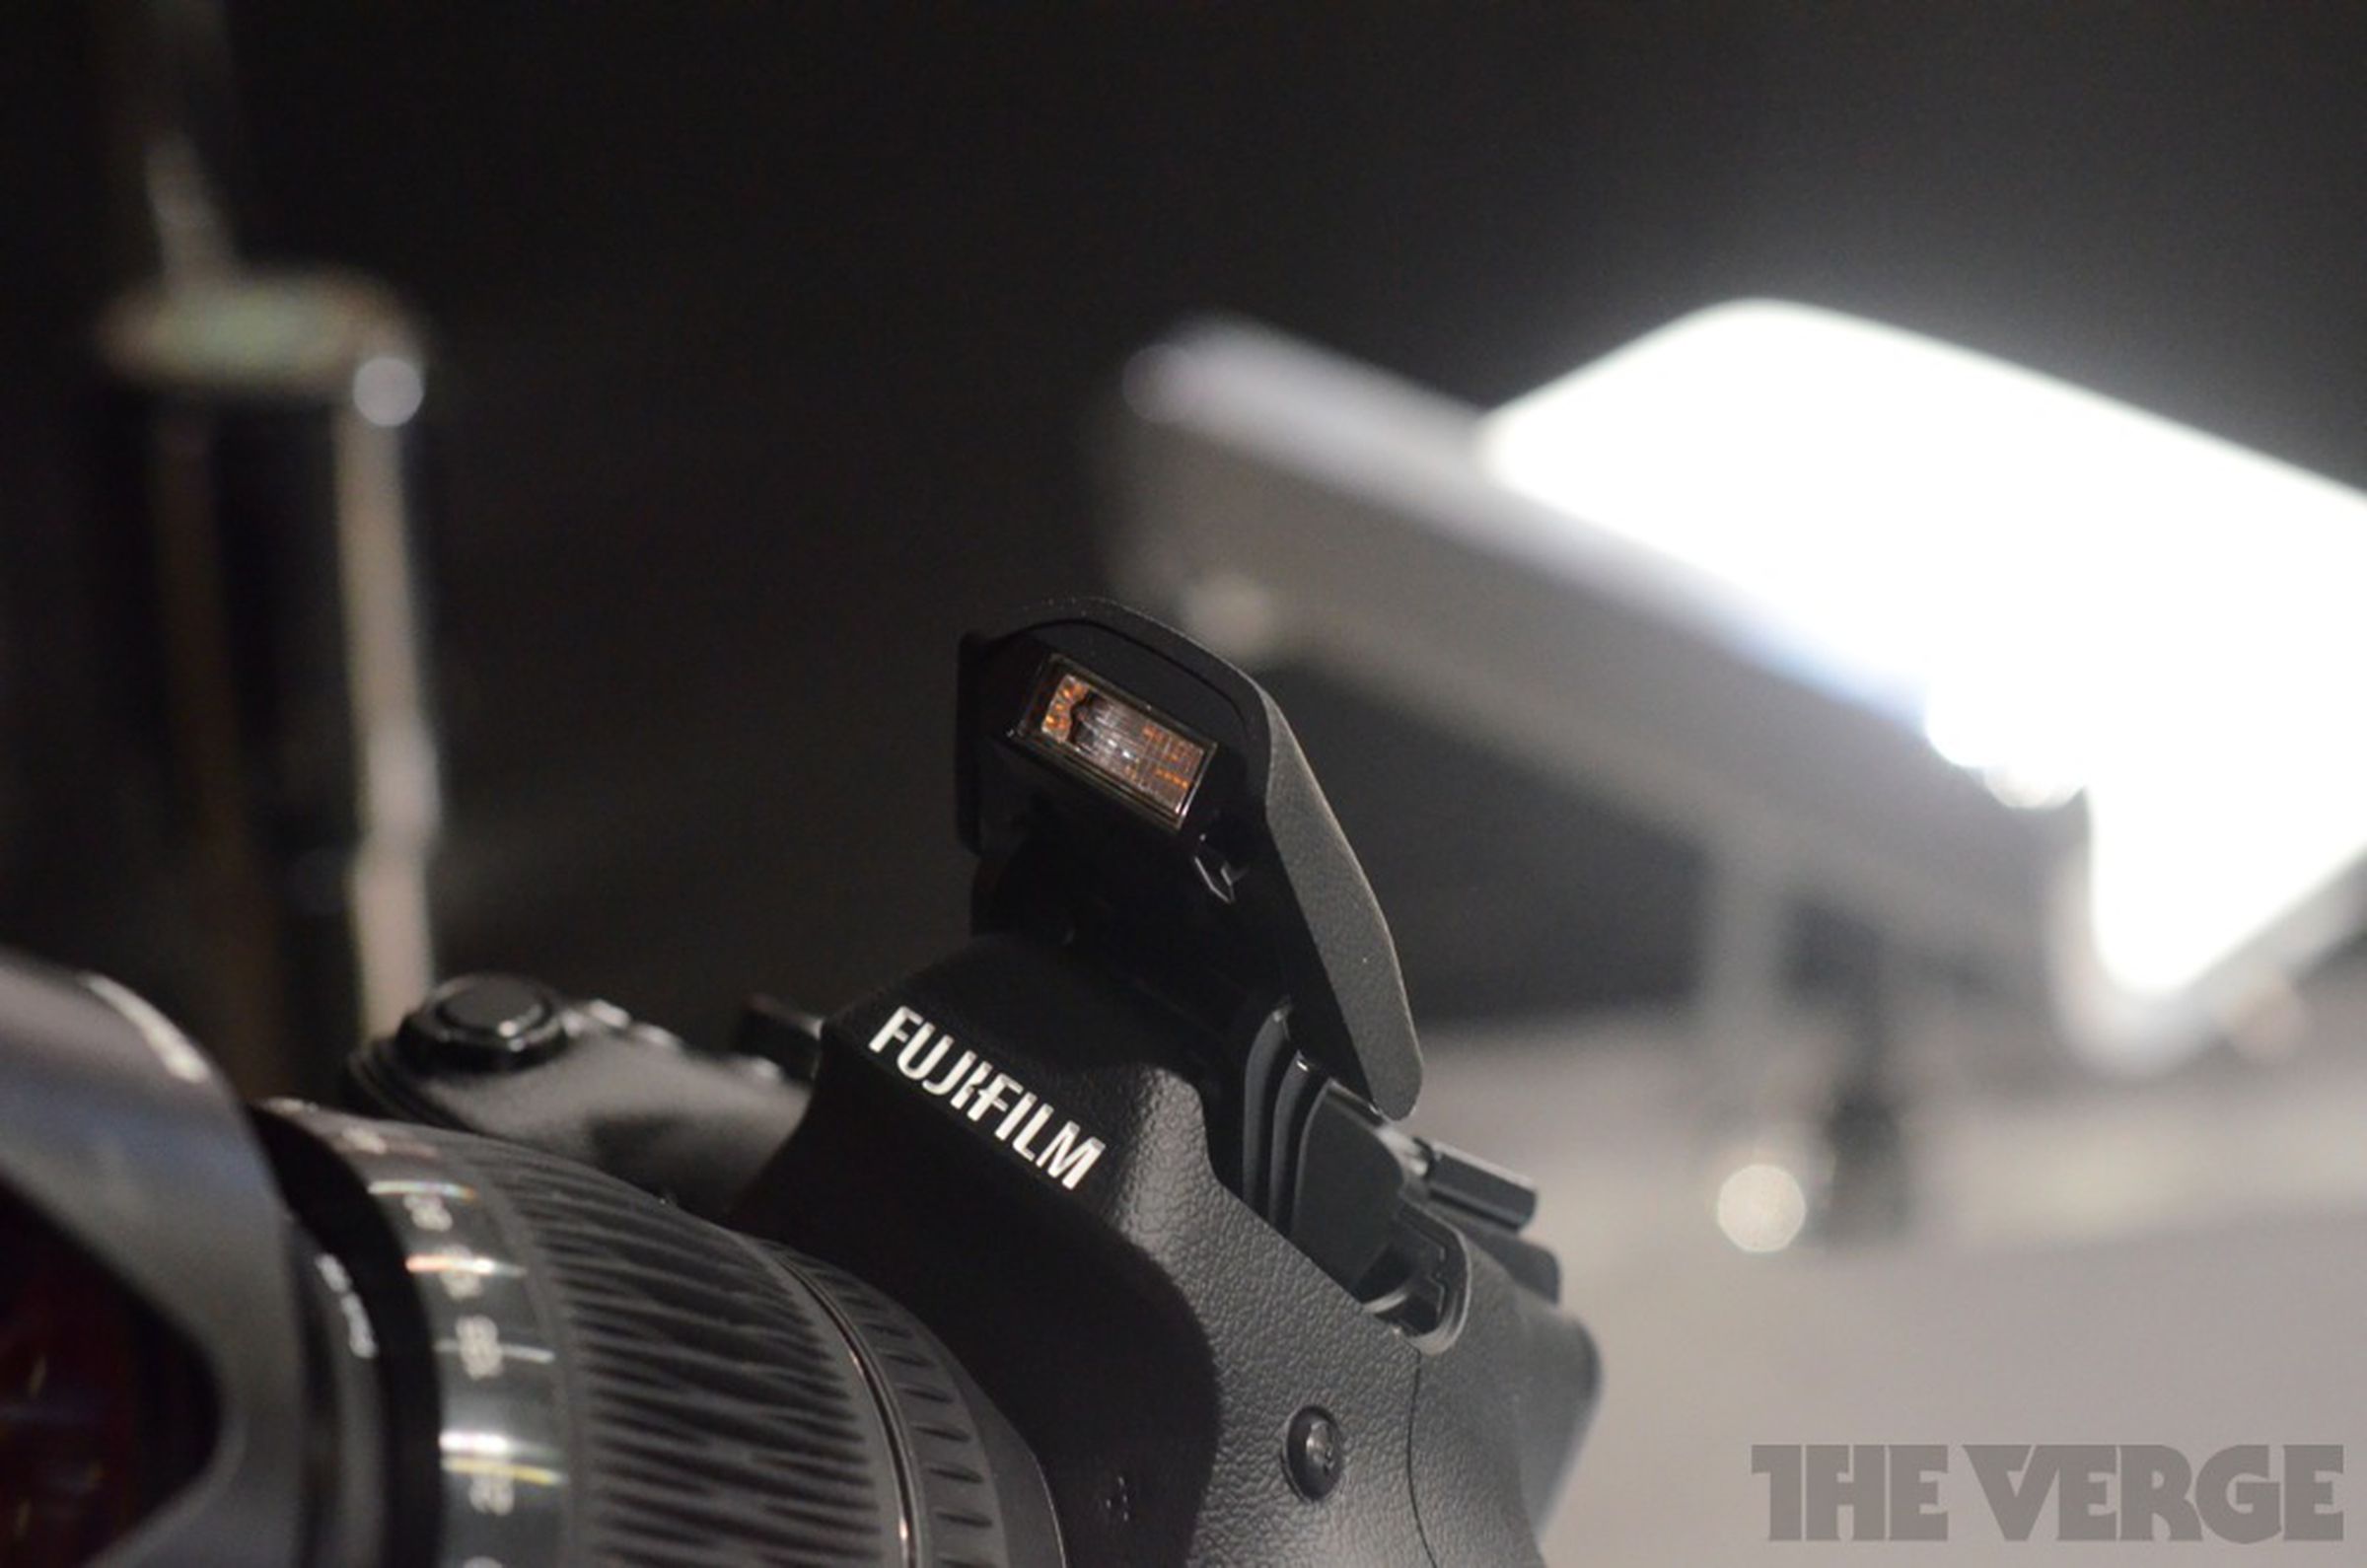 Fujfilm X-S1 hands-on pictures